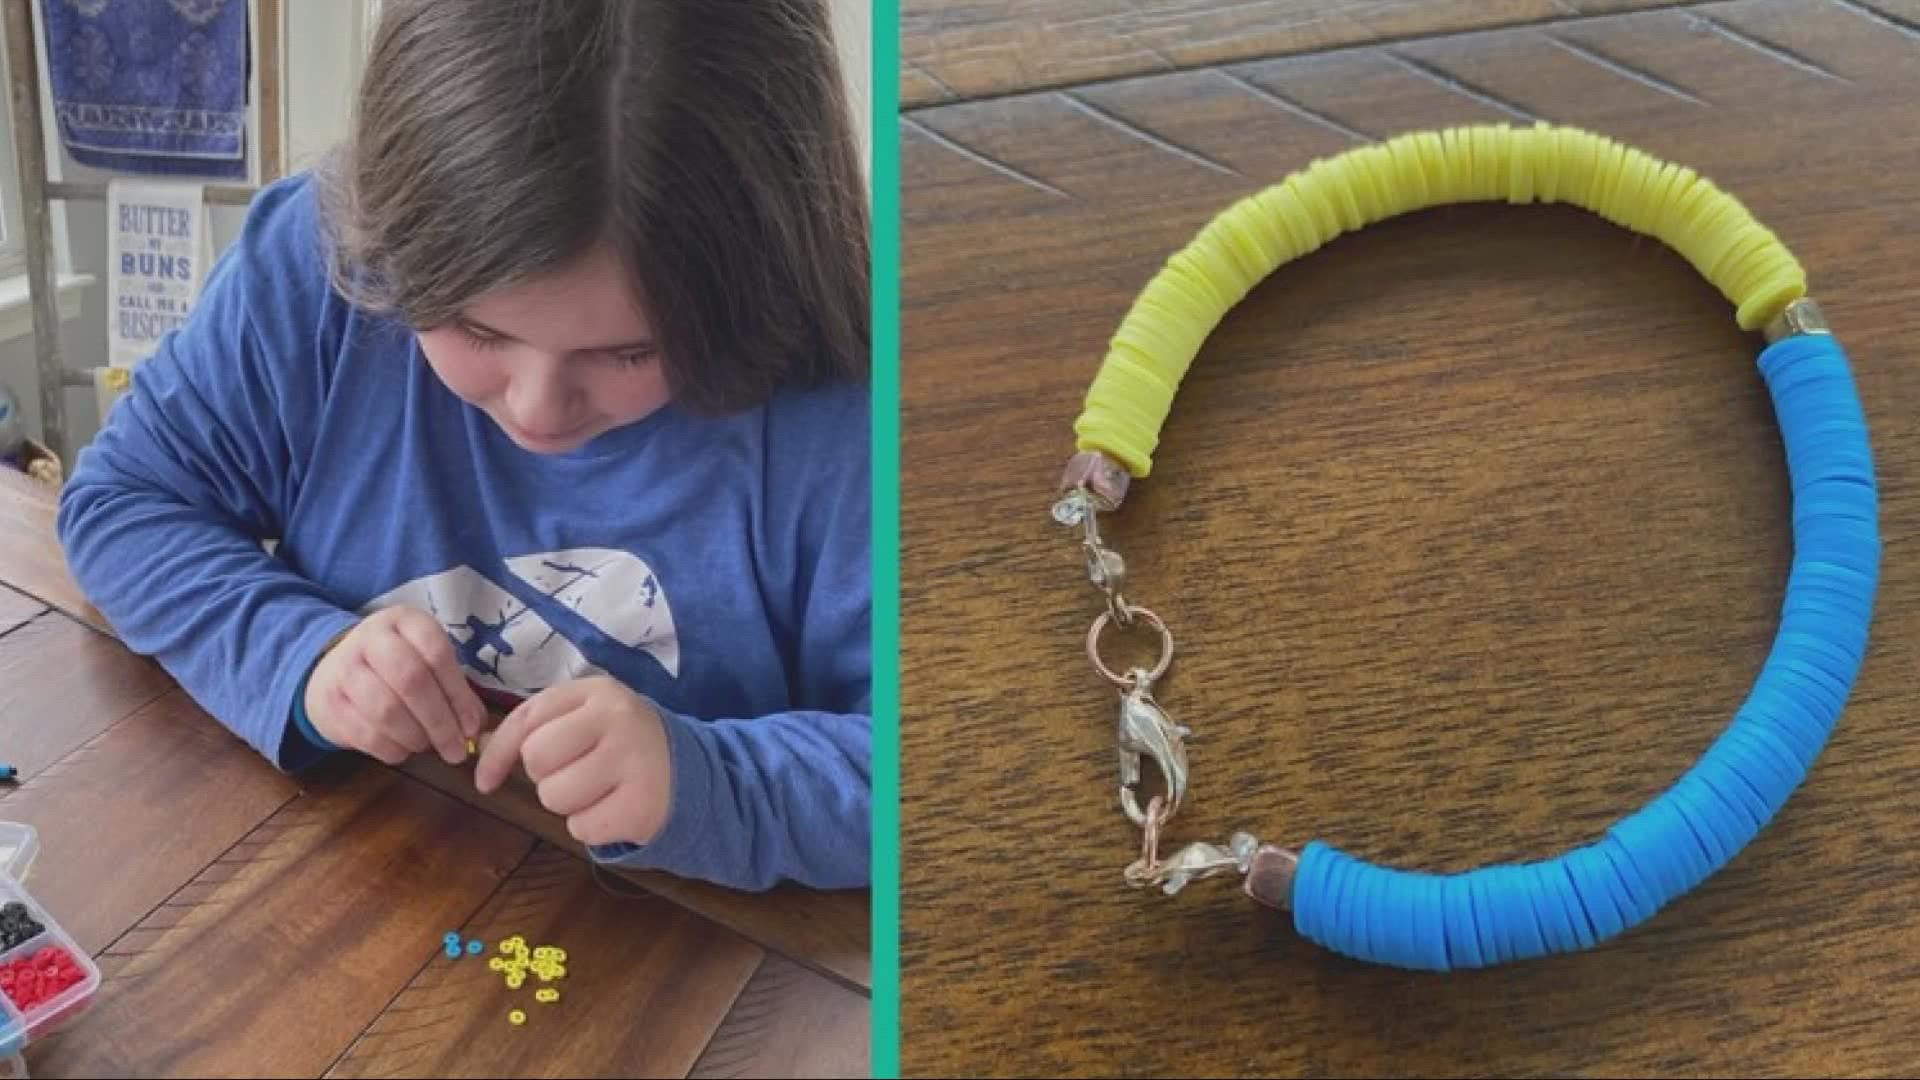 For the last few weeks, Molly Catalano has been crafting homemade yellow and blue bracelets in an effort to raise money for those impacted by the war in Ukraine.